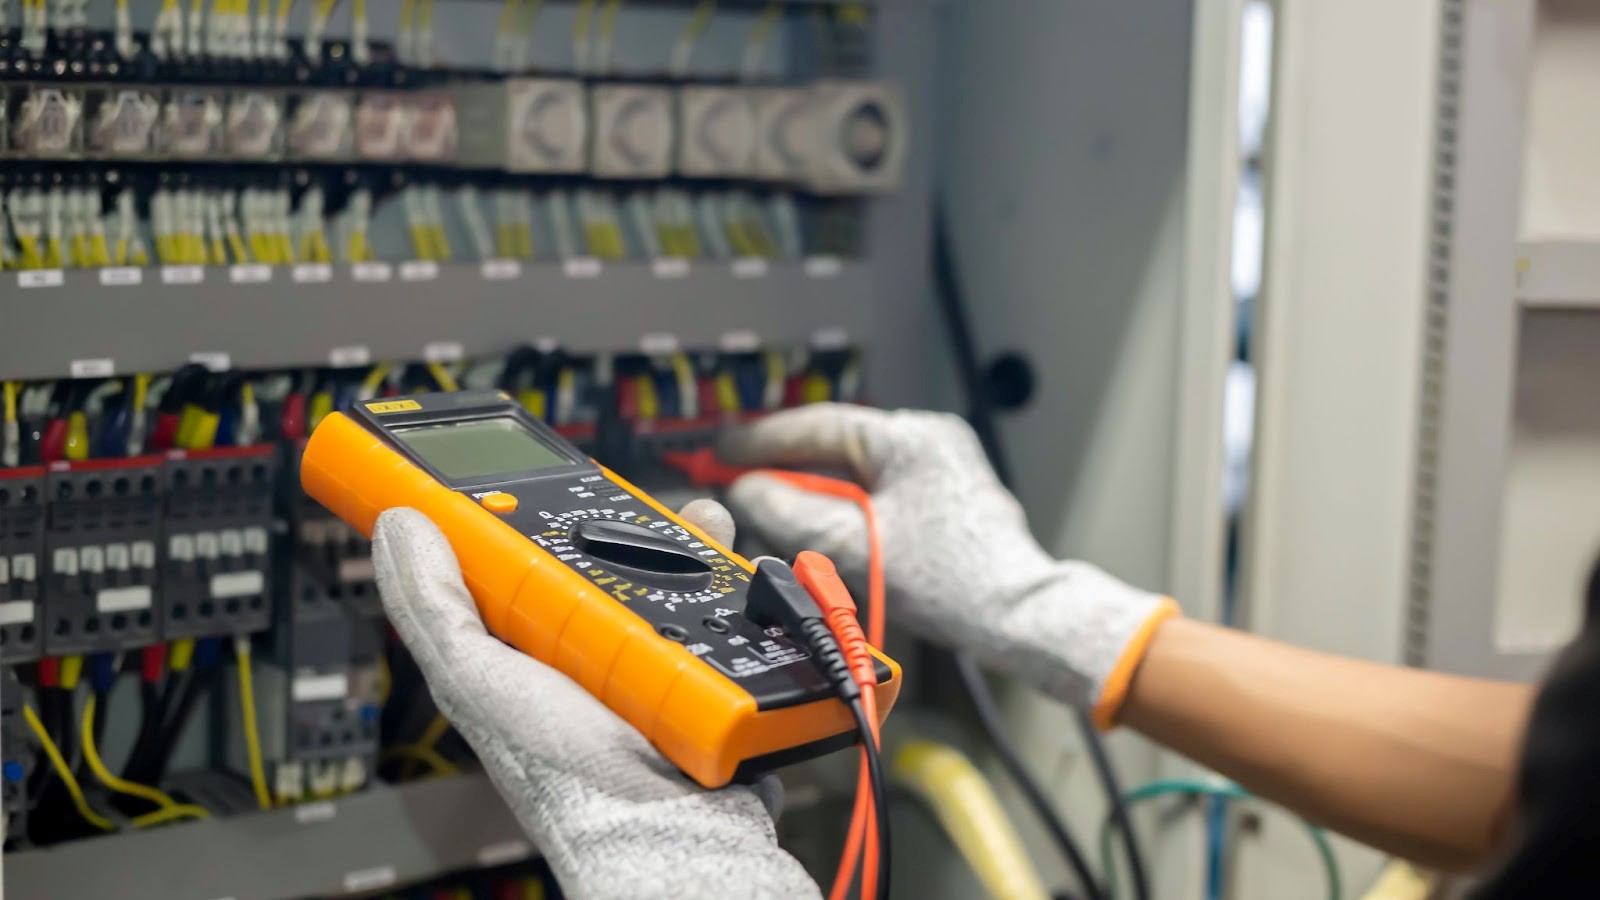 Electrician uses a multimeter to test the electrical installation and power line current in an electrical system control cabinet. 